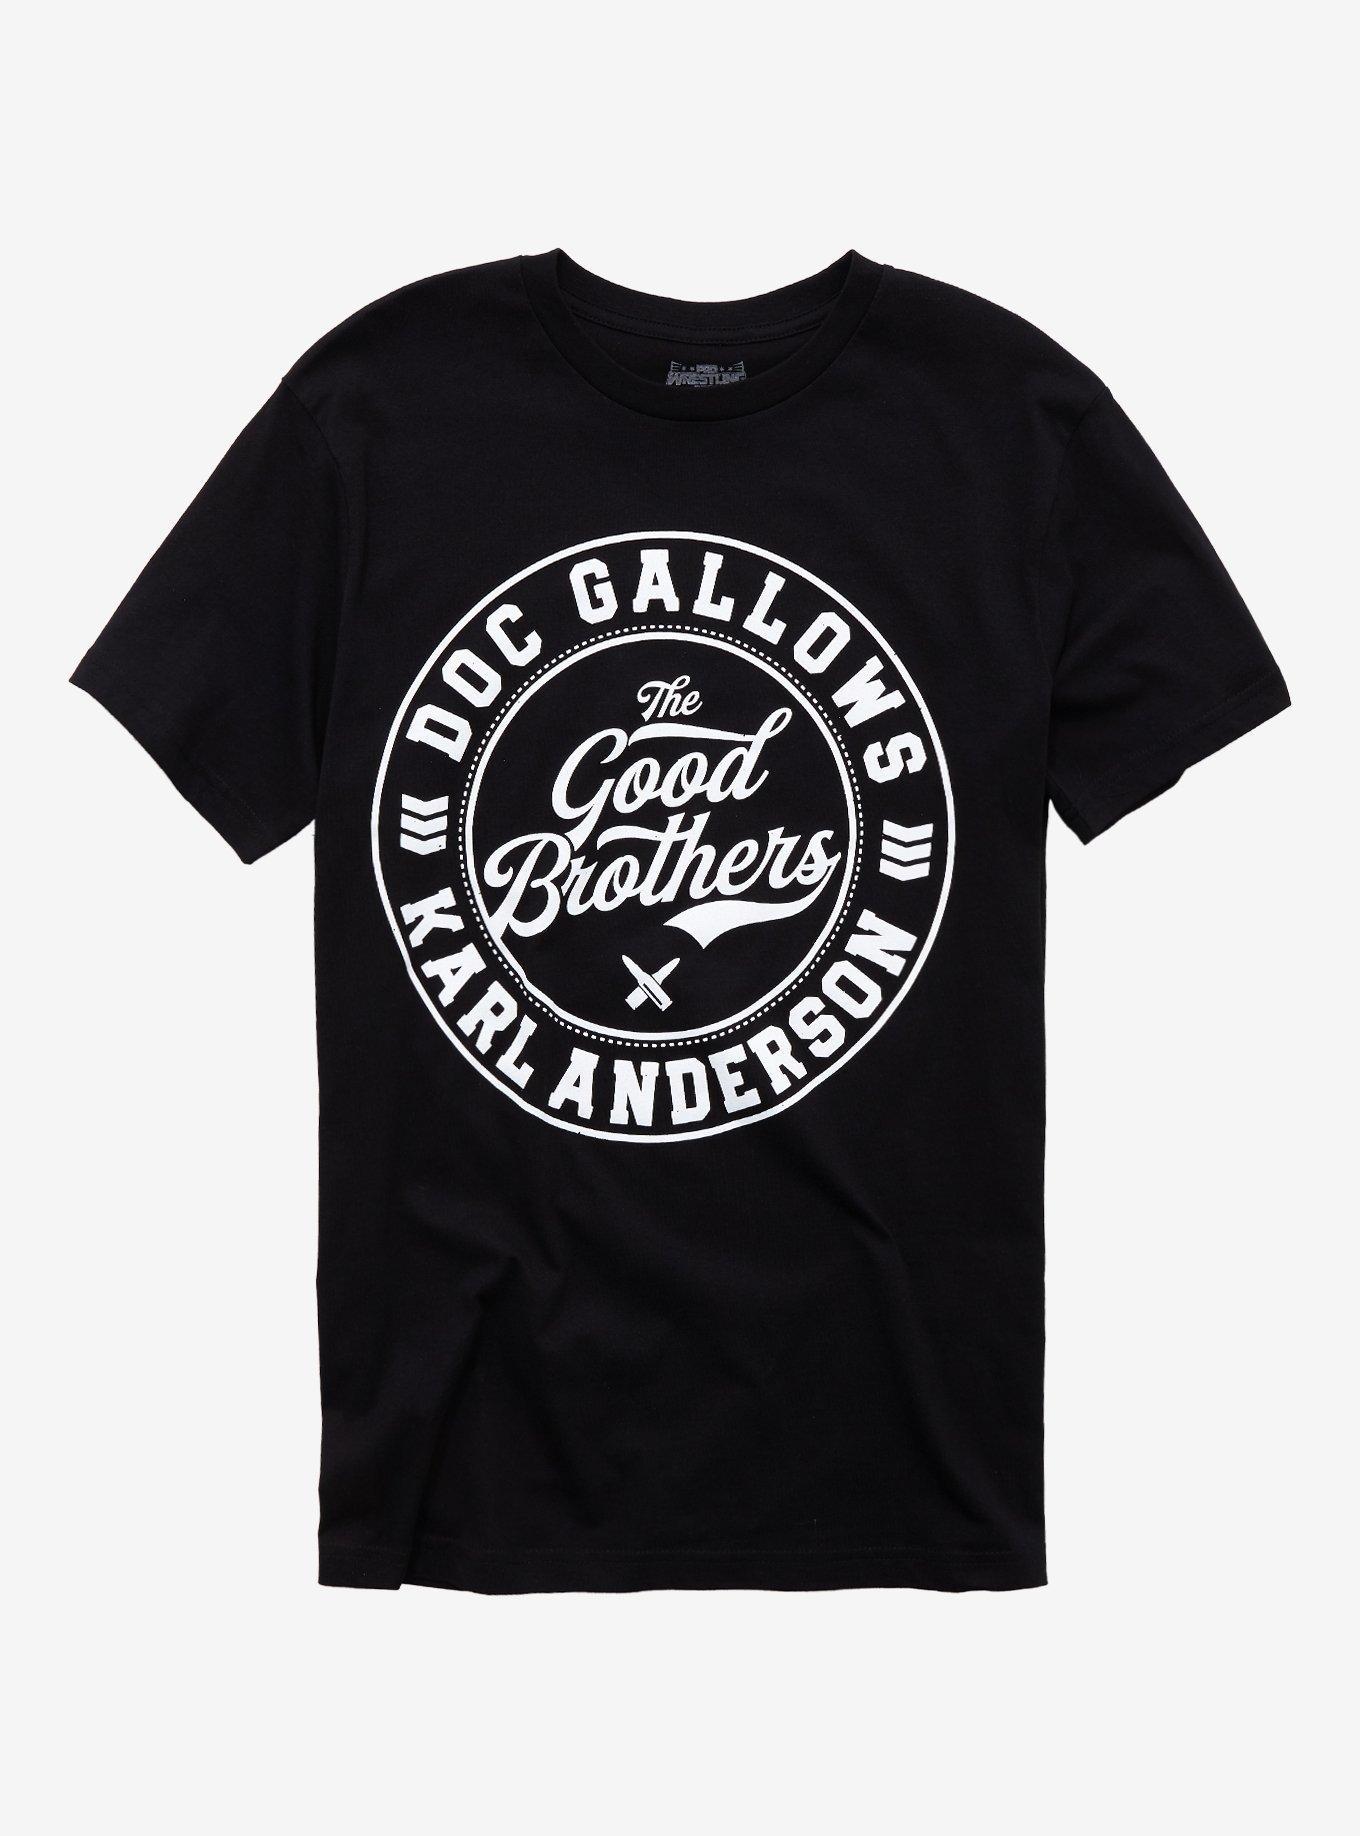 Pro-Wrestling Doc Gallows & Karl Anderson The Good Brothers Logo T-Shirt, BLACK, hi-res